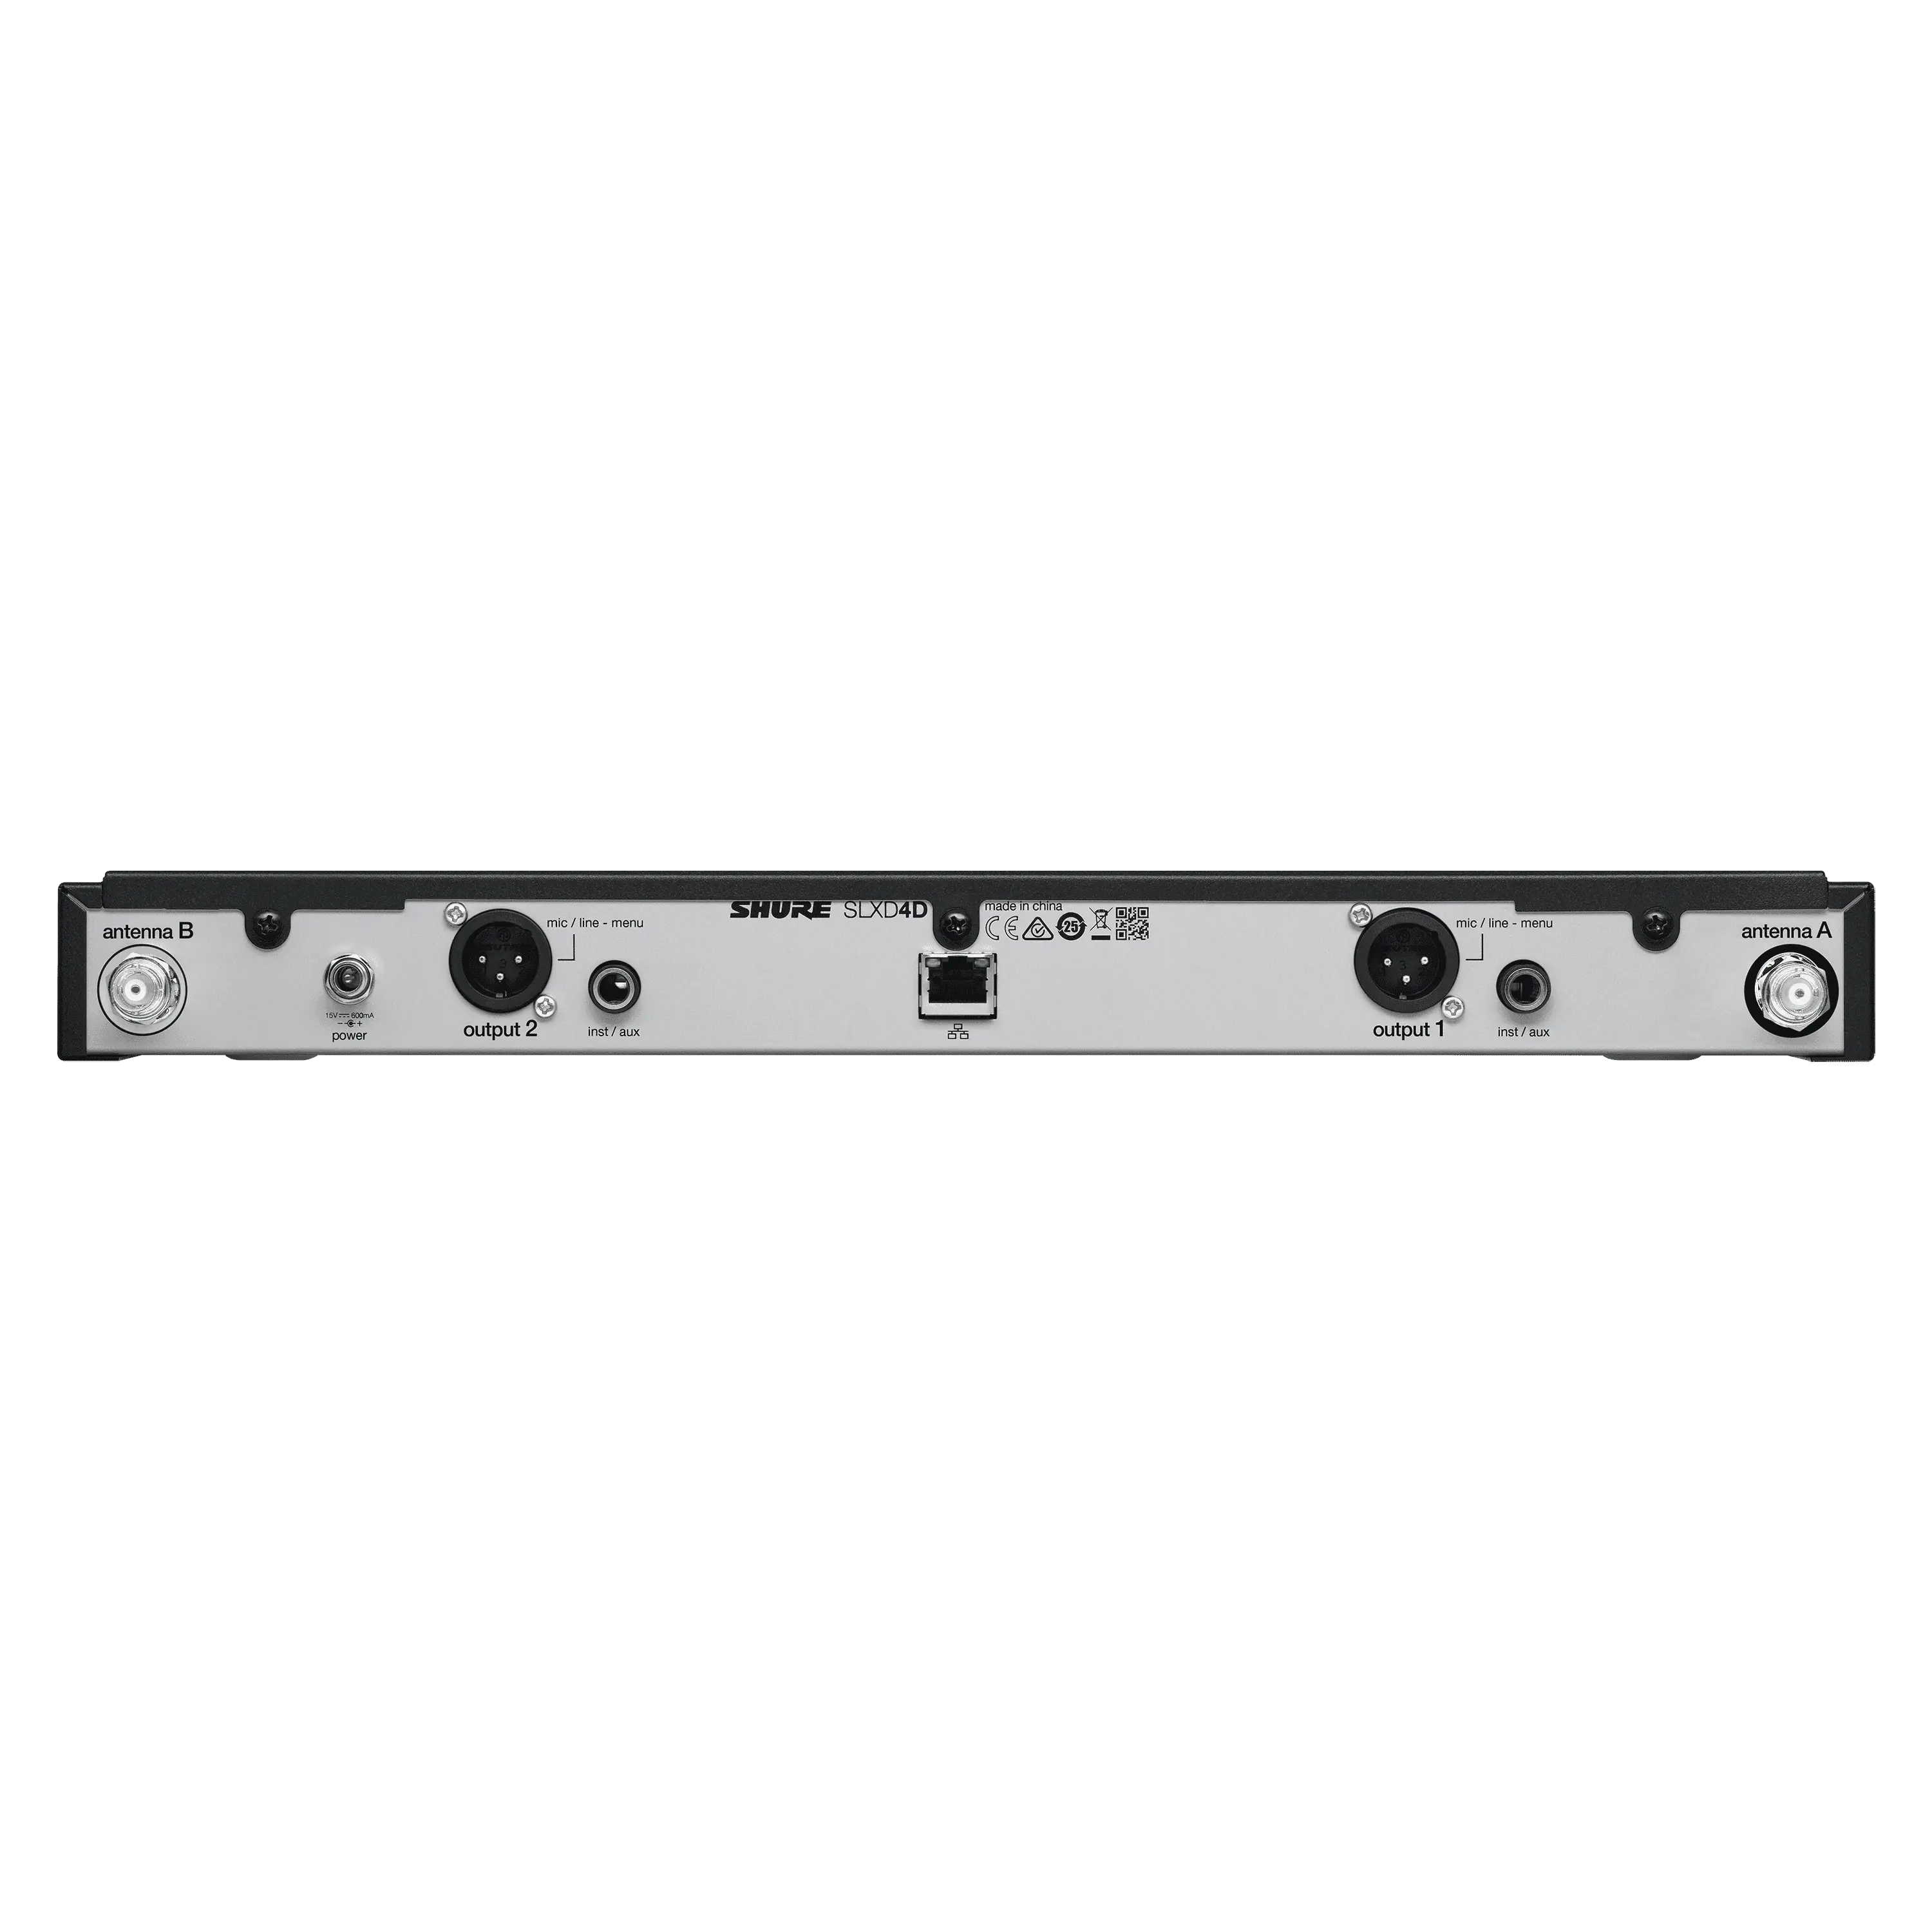 SLXD4D - Dual Channel Receiver - Shure Middle East and Africa